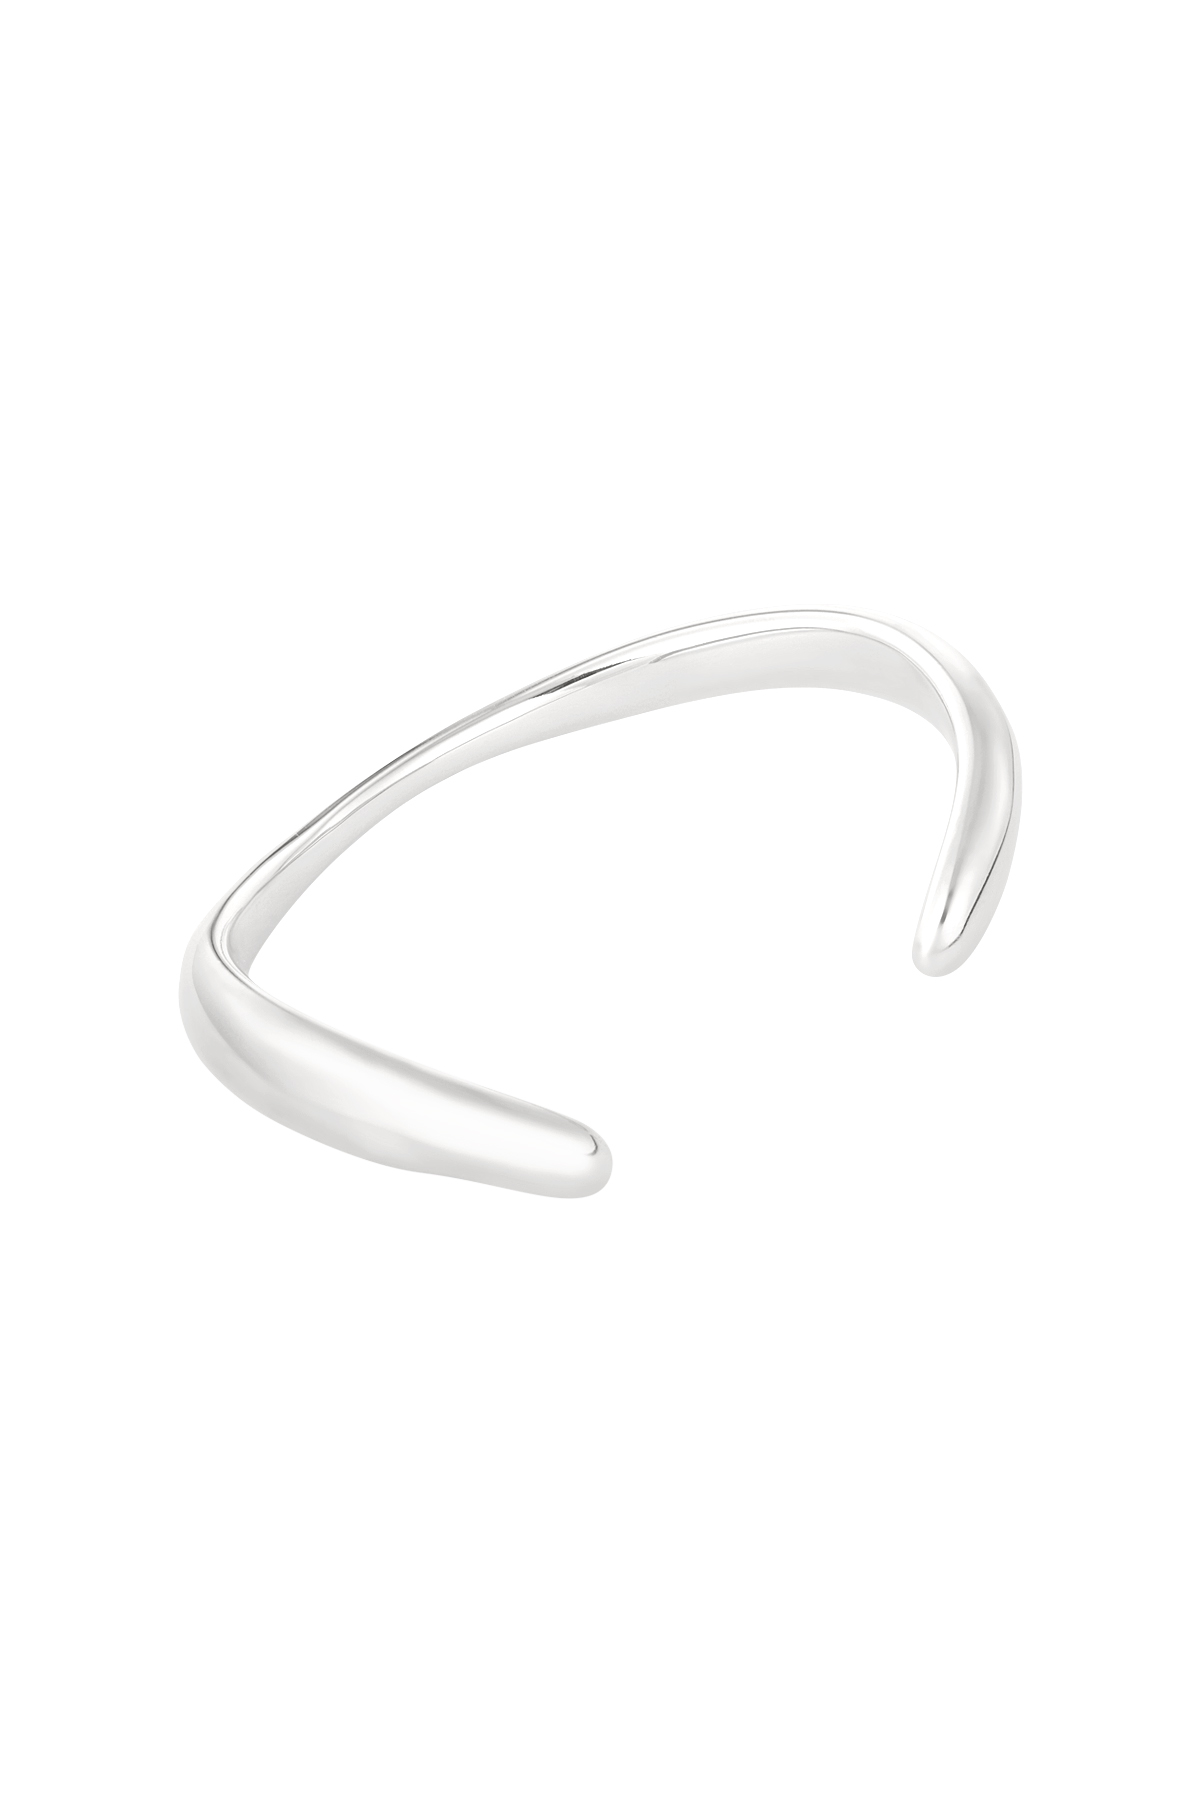 Bangle armband classic story - zilver h5 Afbeelding3